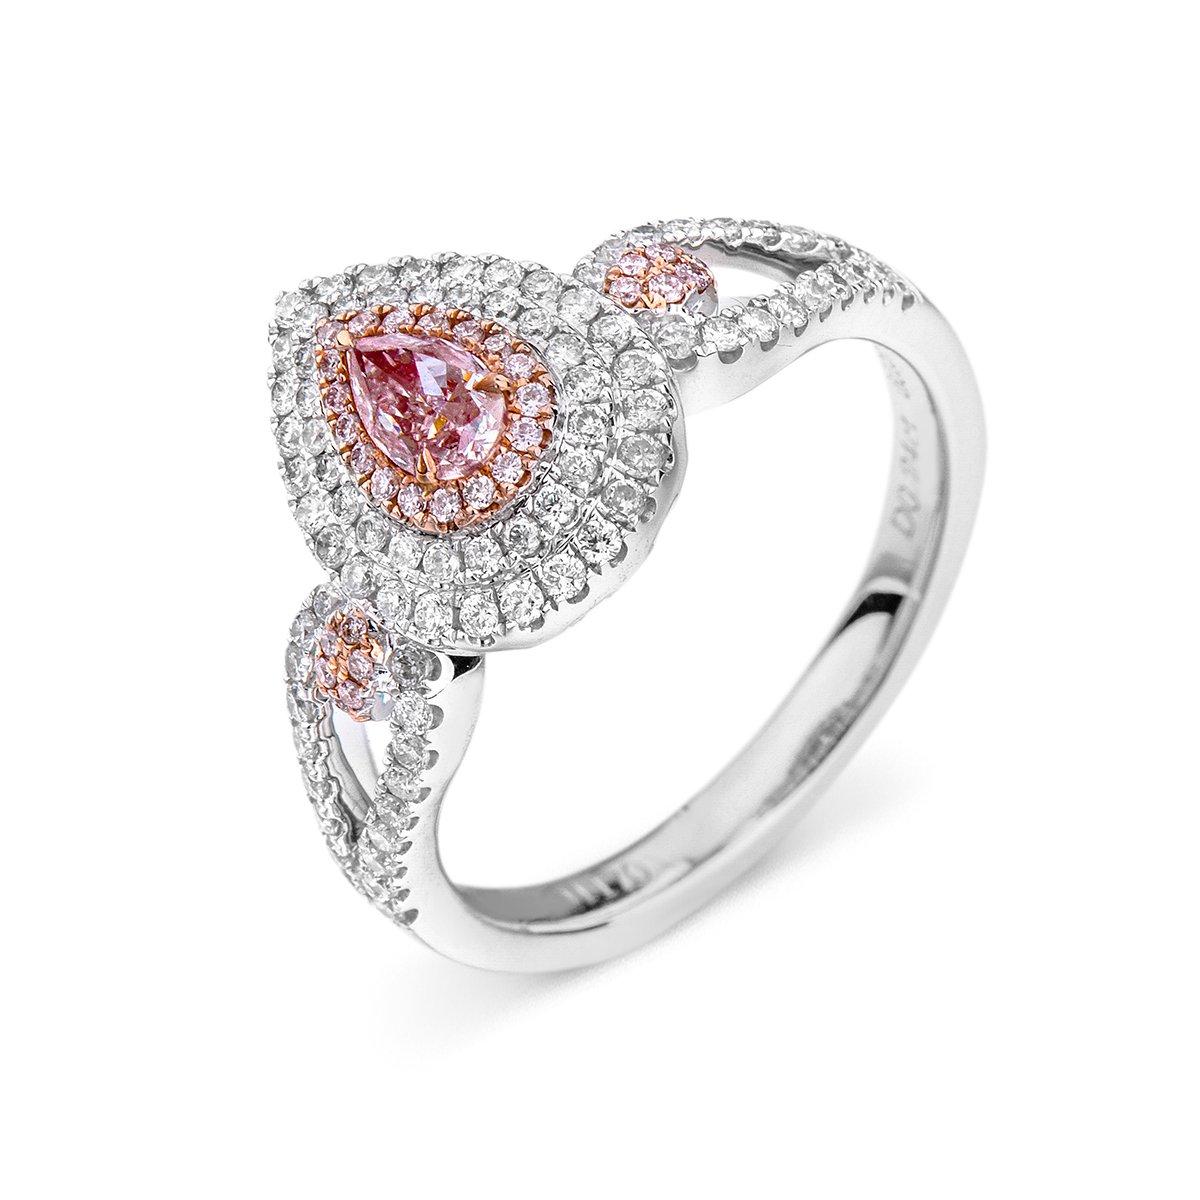 This unique piece consists of 0.24 carat natural pink diamonds, surrounded by smaller natural white diamonds making up a total of 0.75 Carats. It is GIA certified and has been expertly crafted using 18 Karat White Gold. 

The colour pink has long